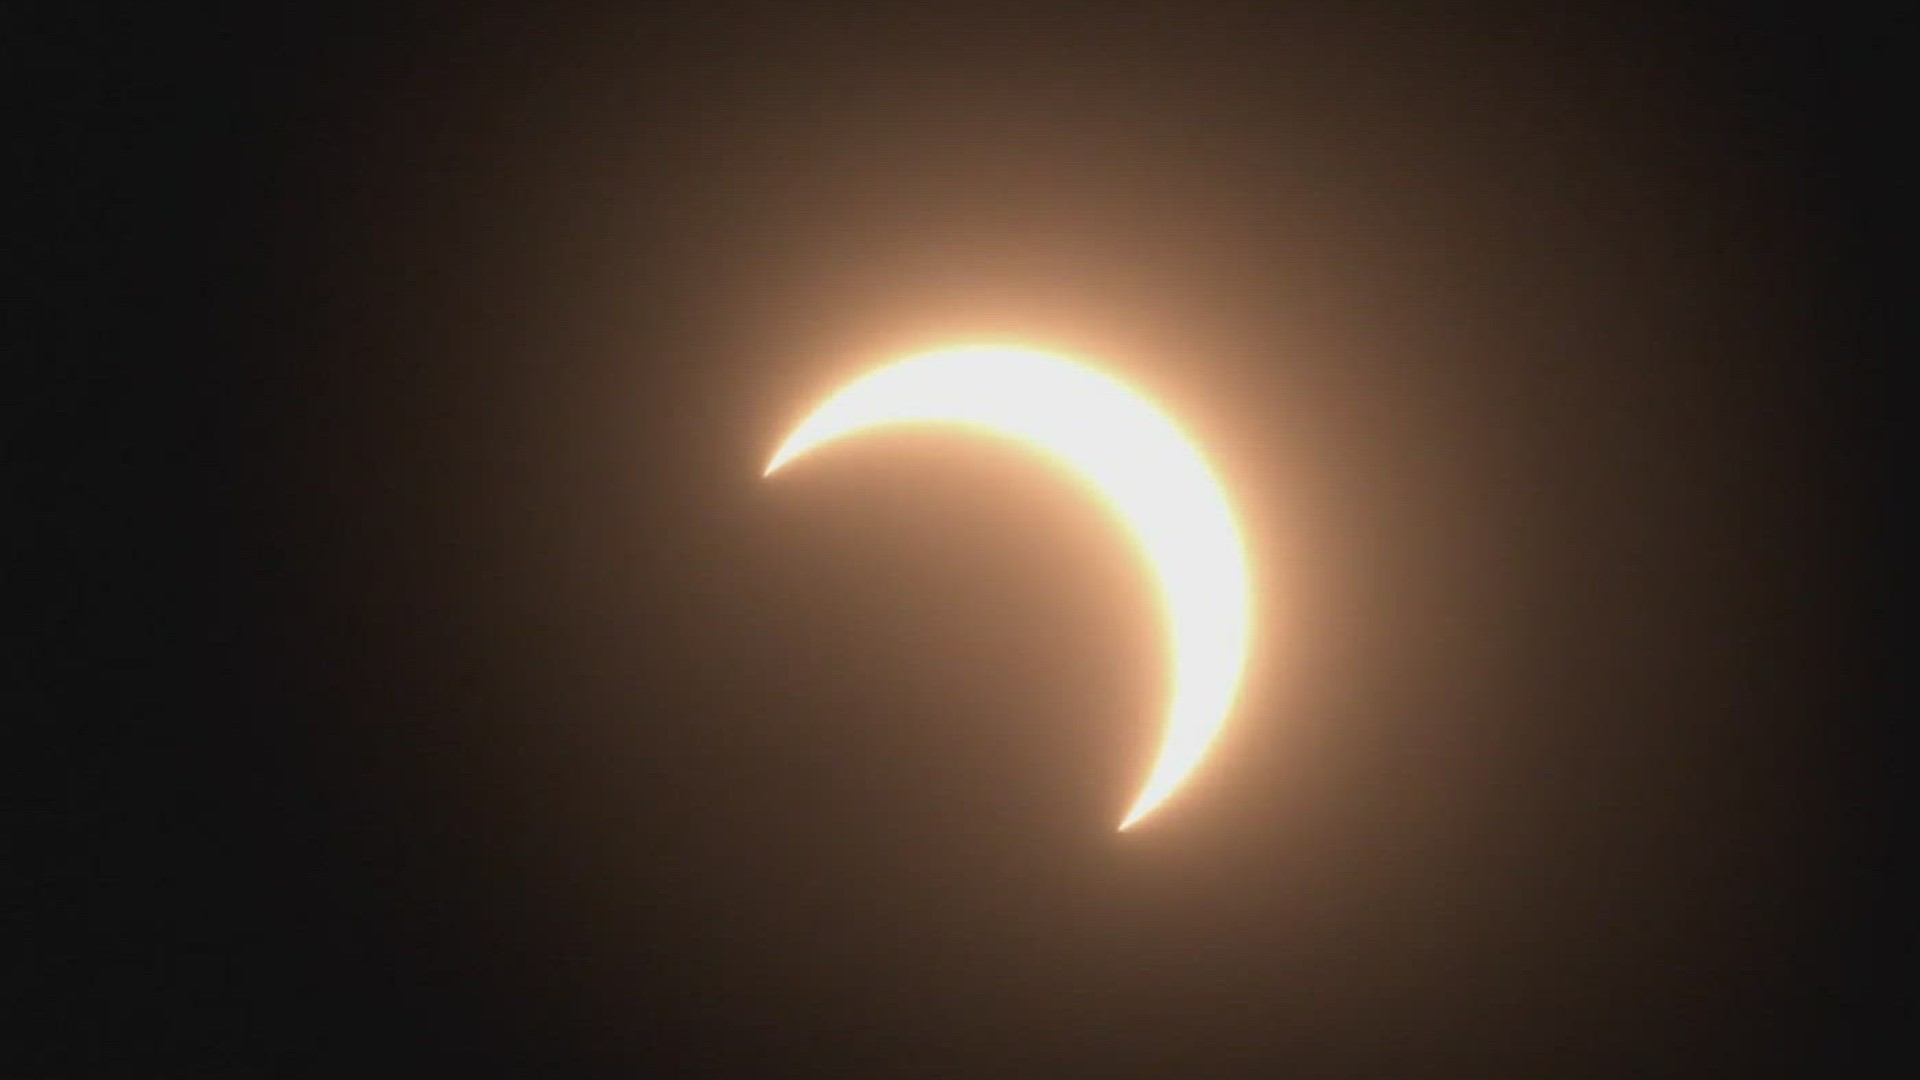 Texas A&M University-Corpus Christi physics professor Galina Reid said there's a reason why the Coastal Bend is considered an ideal place to view the eclipse.